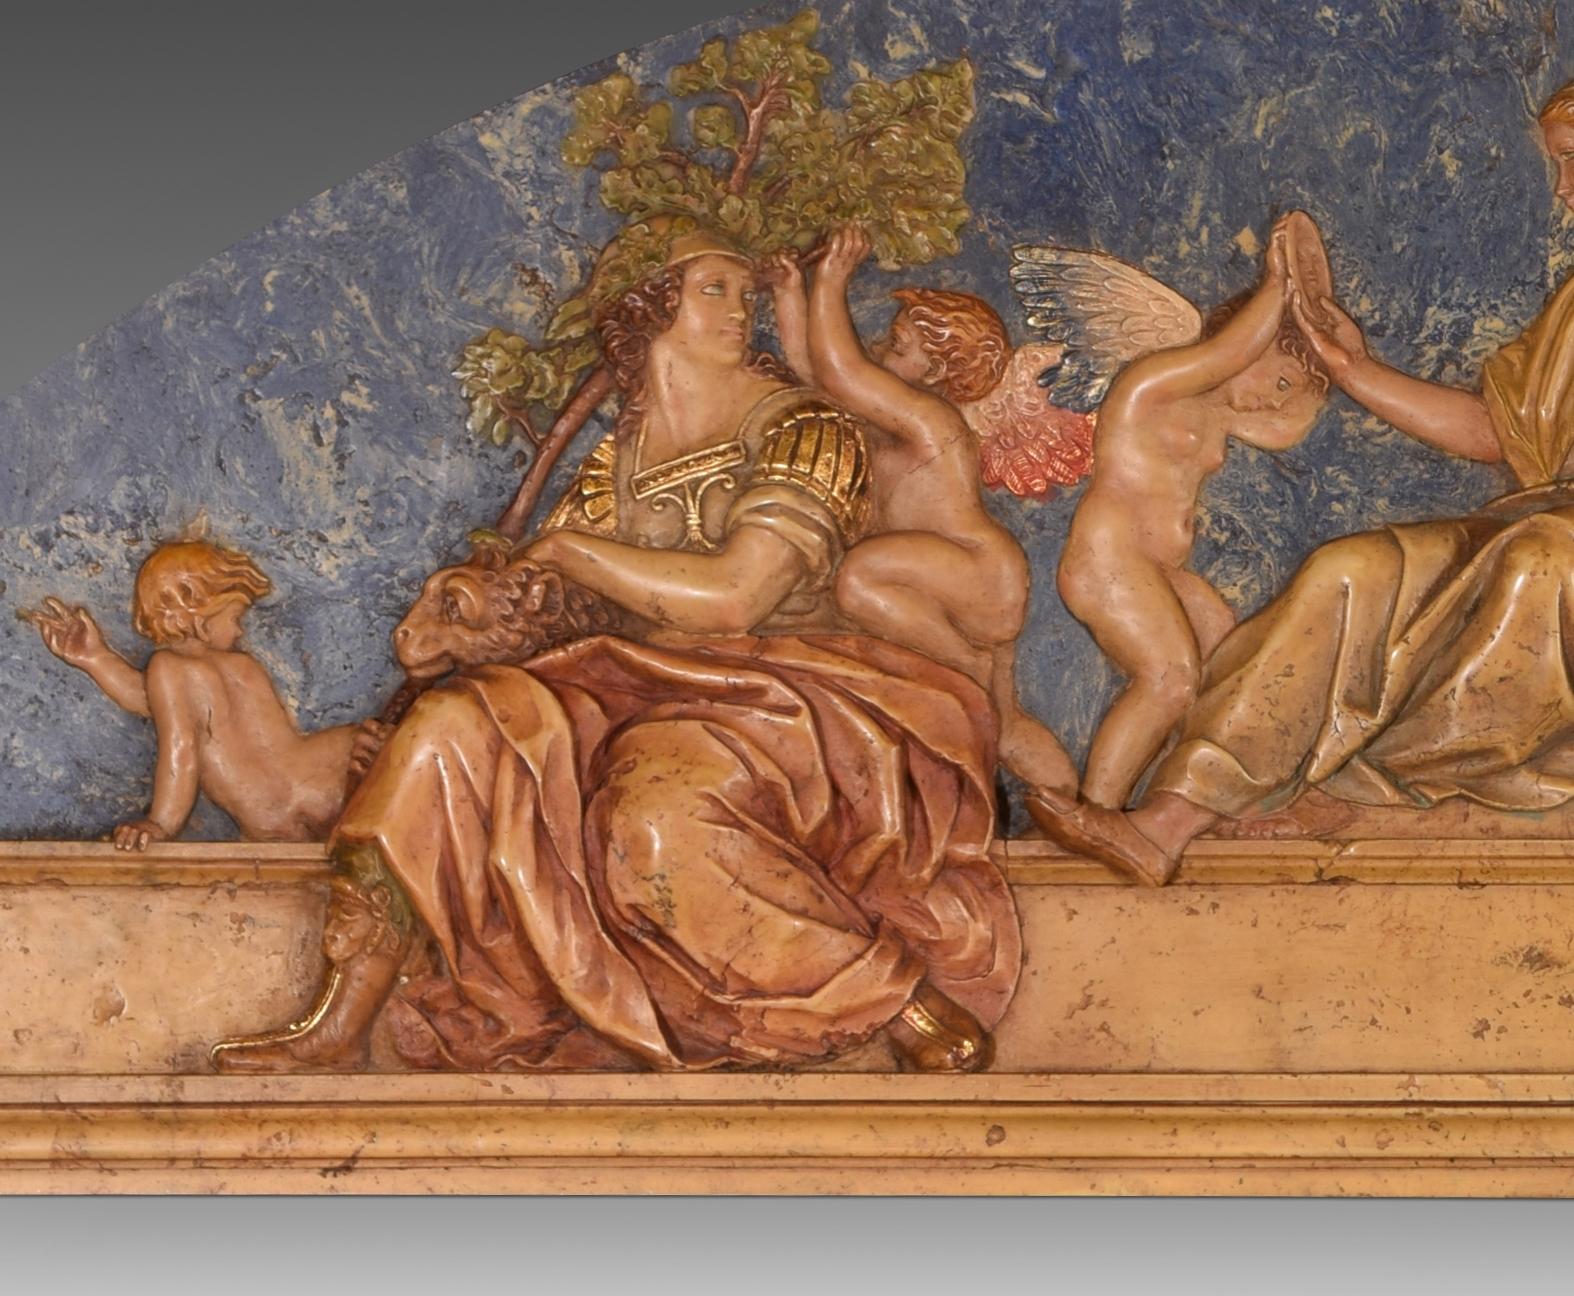 Virtues, relief. Molded and polychrome alabaster. 20th century, Inspired by models by SANZIO, Rafael or Raffaello (1483-1520).
 Relief with figurative decoration made of alabaster molded with polychrome inspired by the fresco of “The Cardinal and